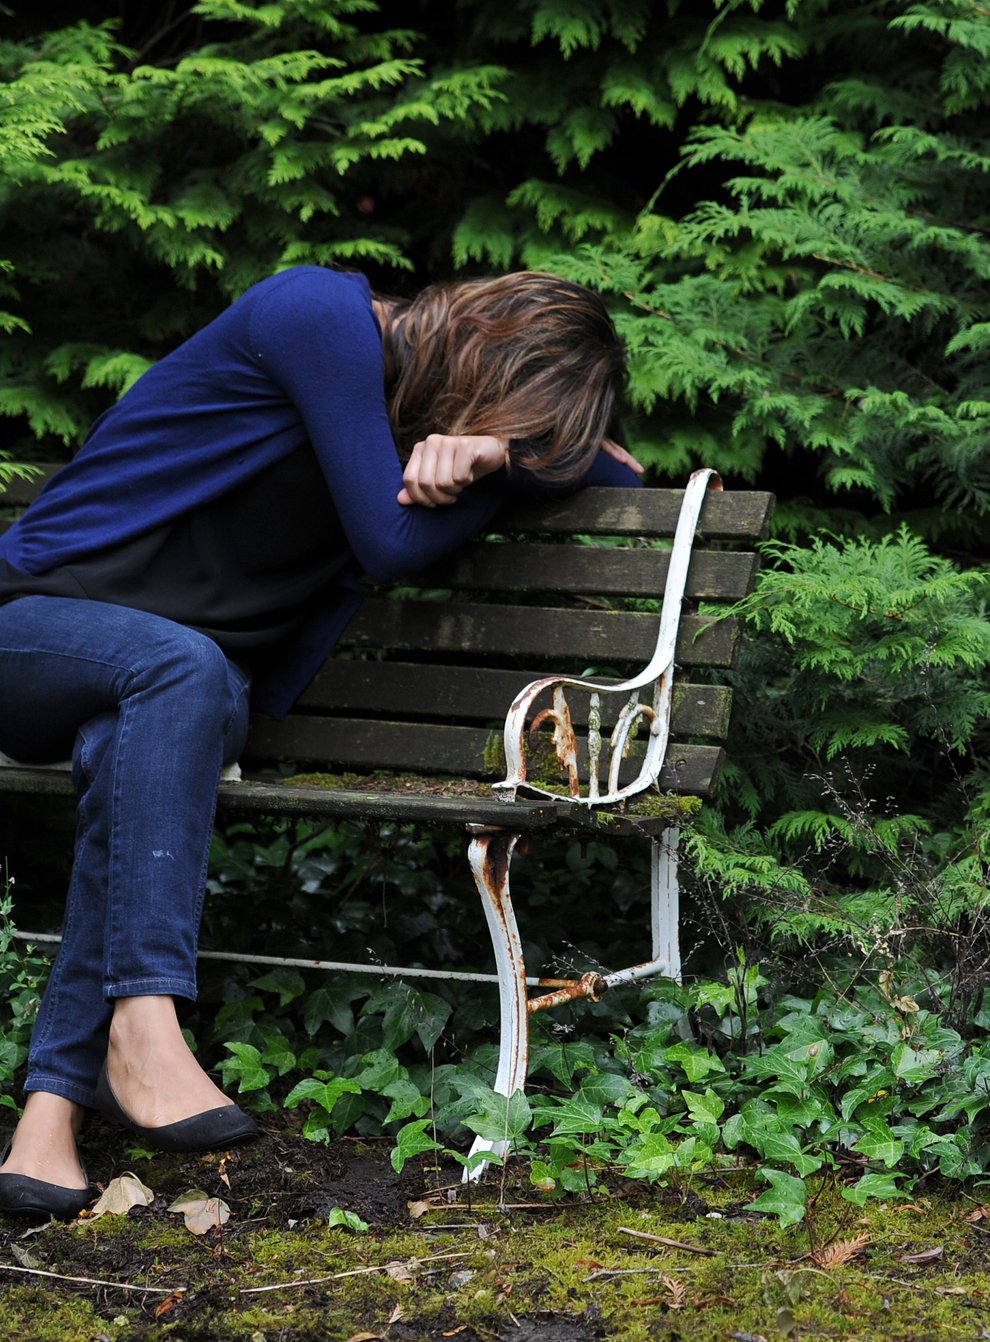 A woman showing signs of fatigue